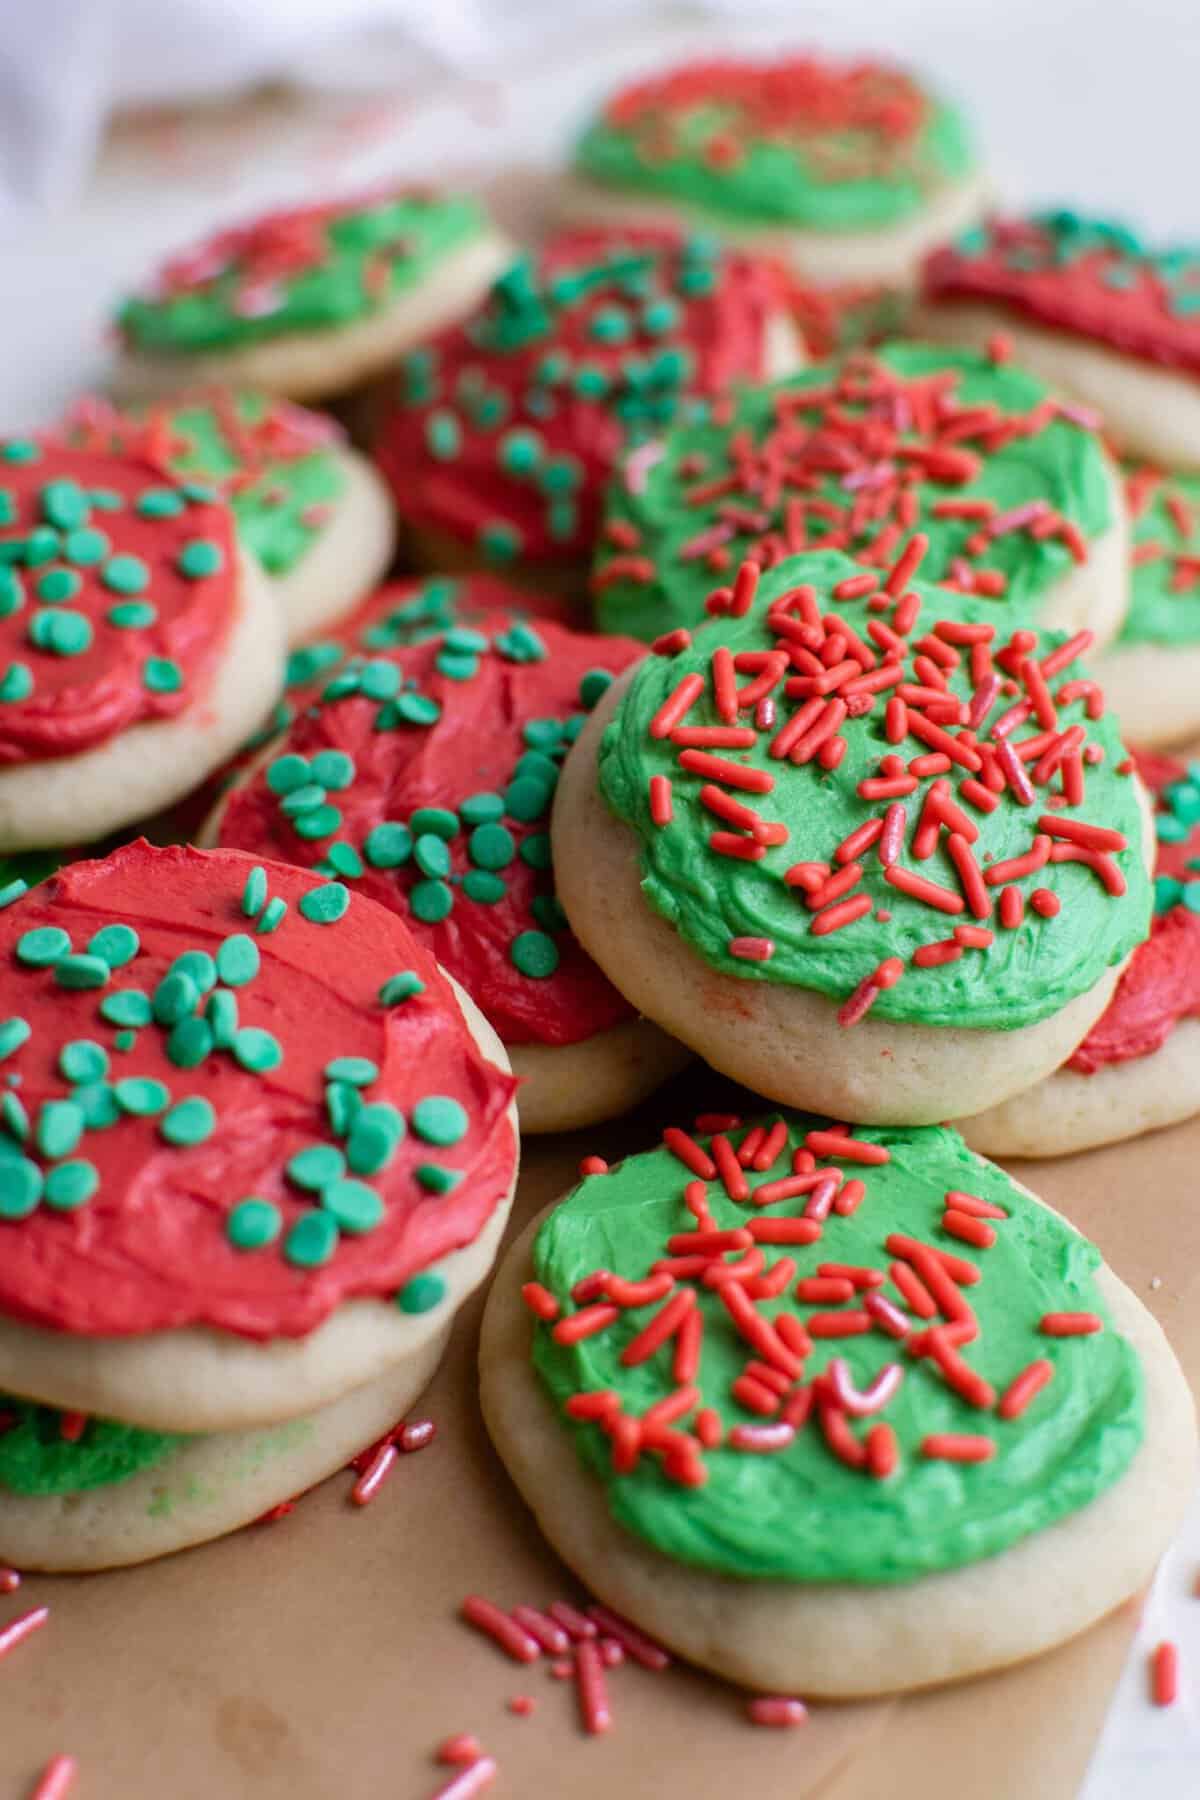 Frosted Holiday Sugar Cookies - Lofthouse Style Sugar Cookies